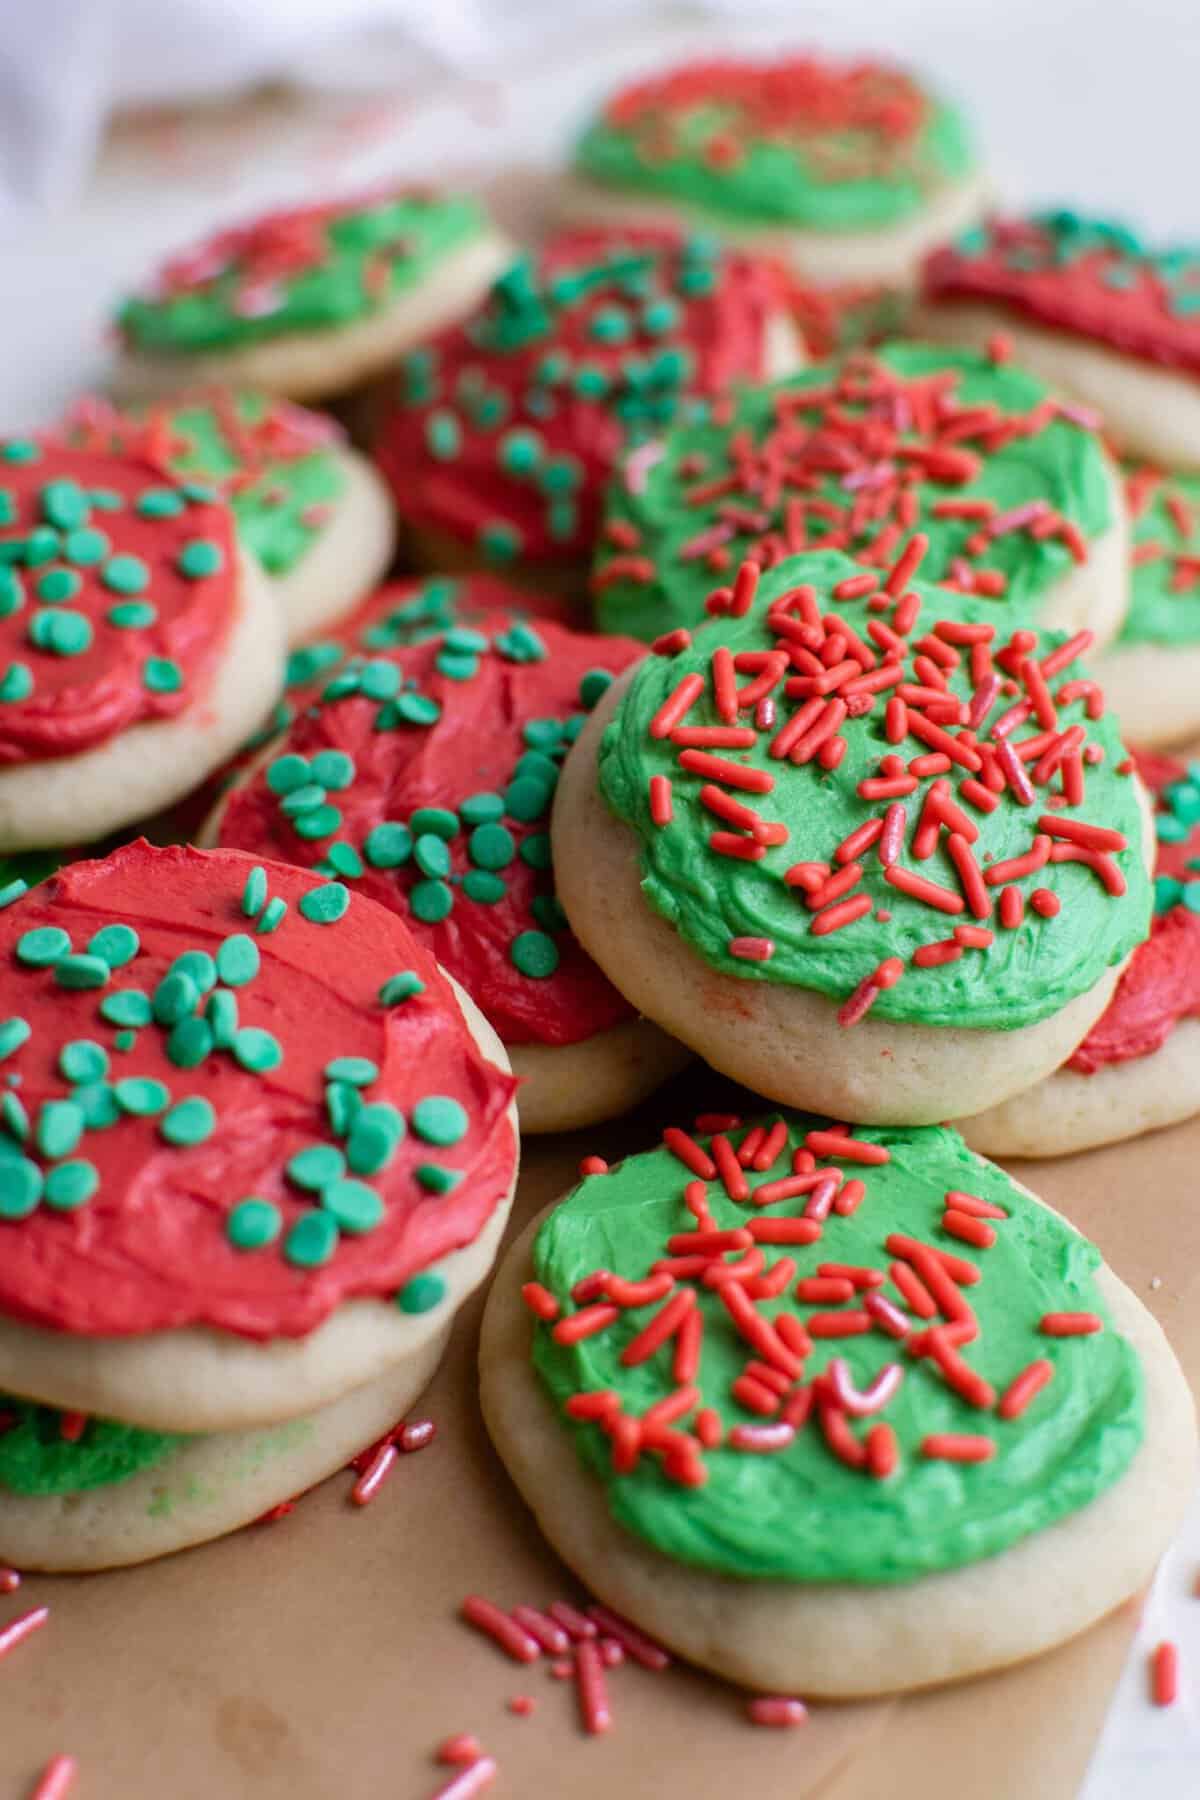 Frosted Holiday Sugar Cookies - Lofthouse Style Sugar Cookies